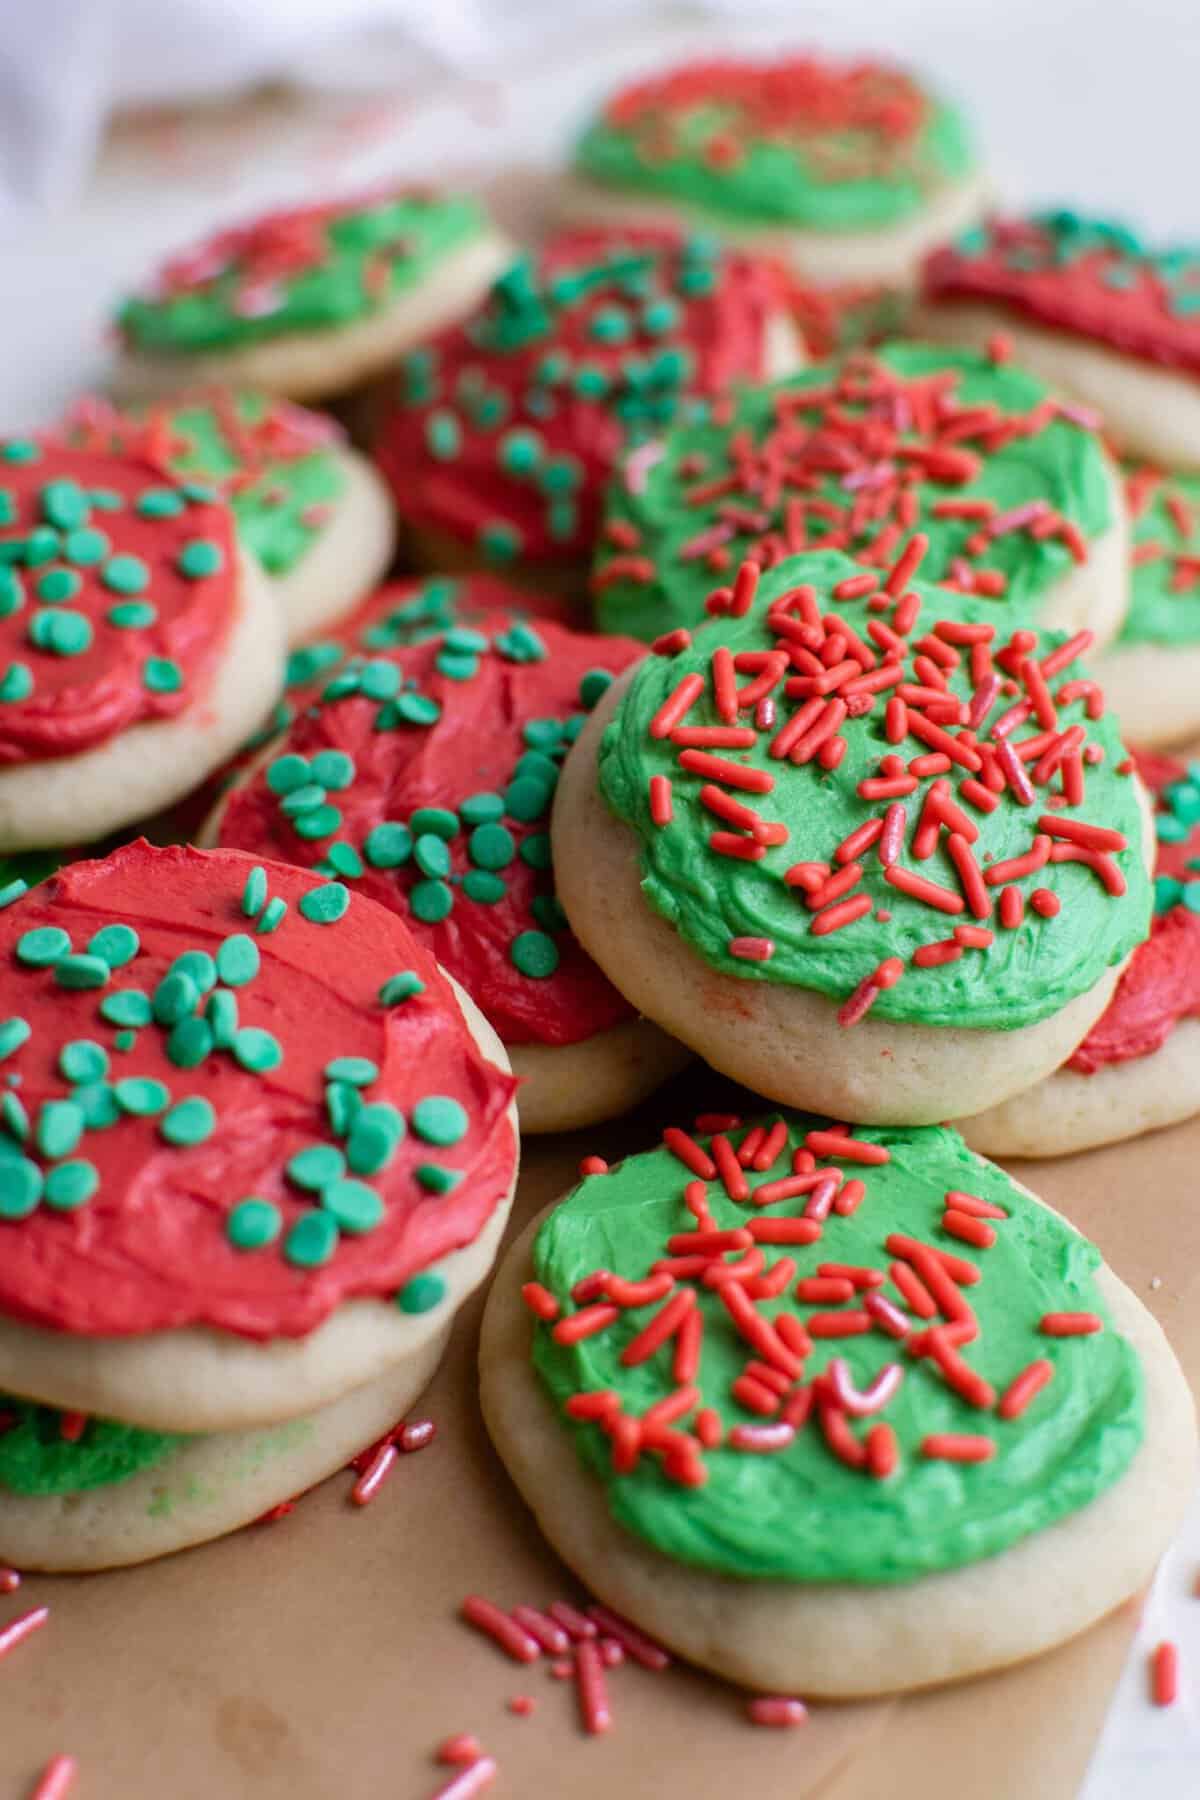 Frosted Holiday Sugar Cookies - Lofthouse Style Sugar Cookies